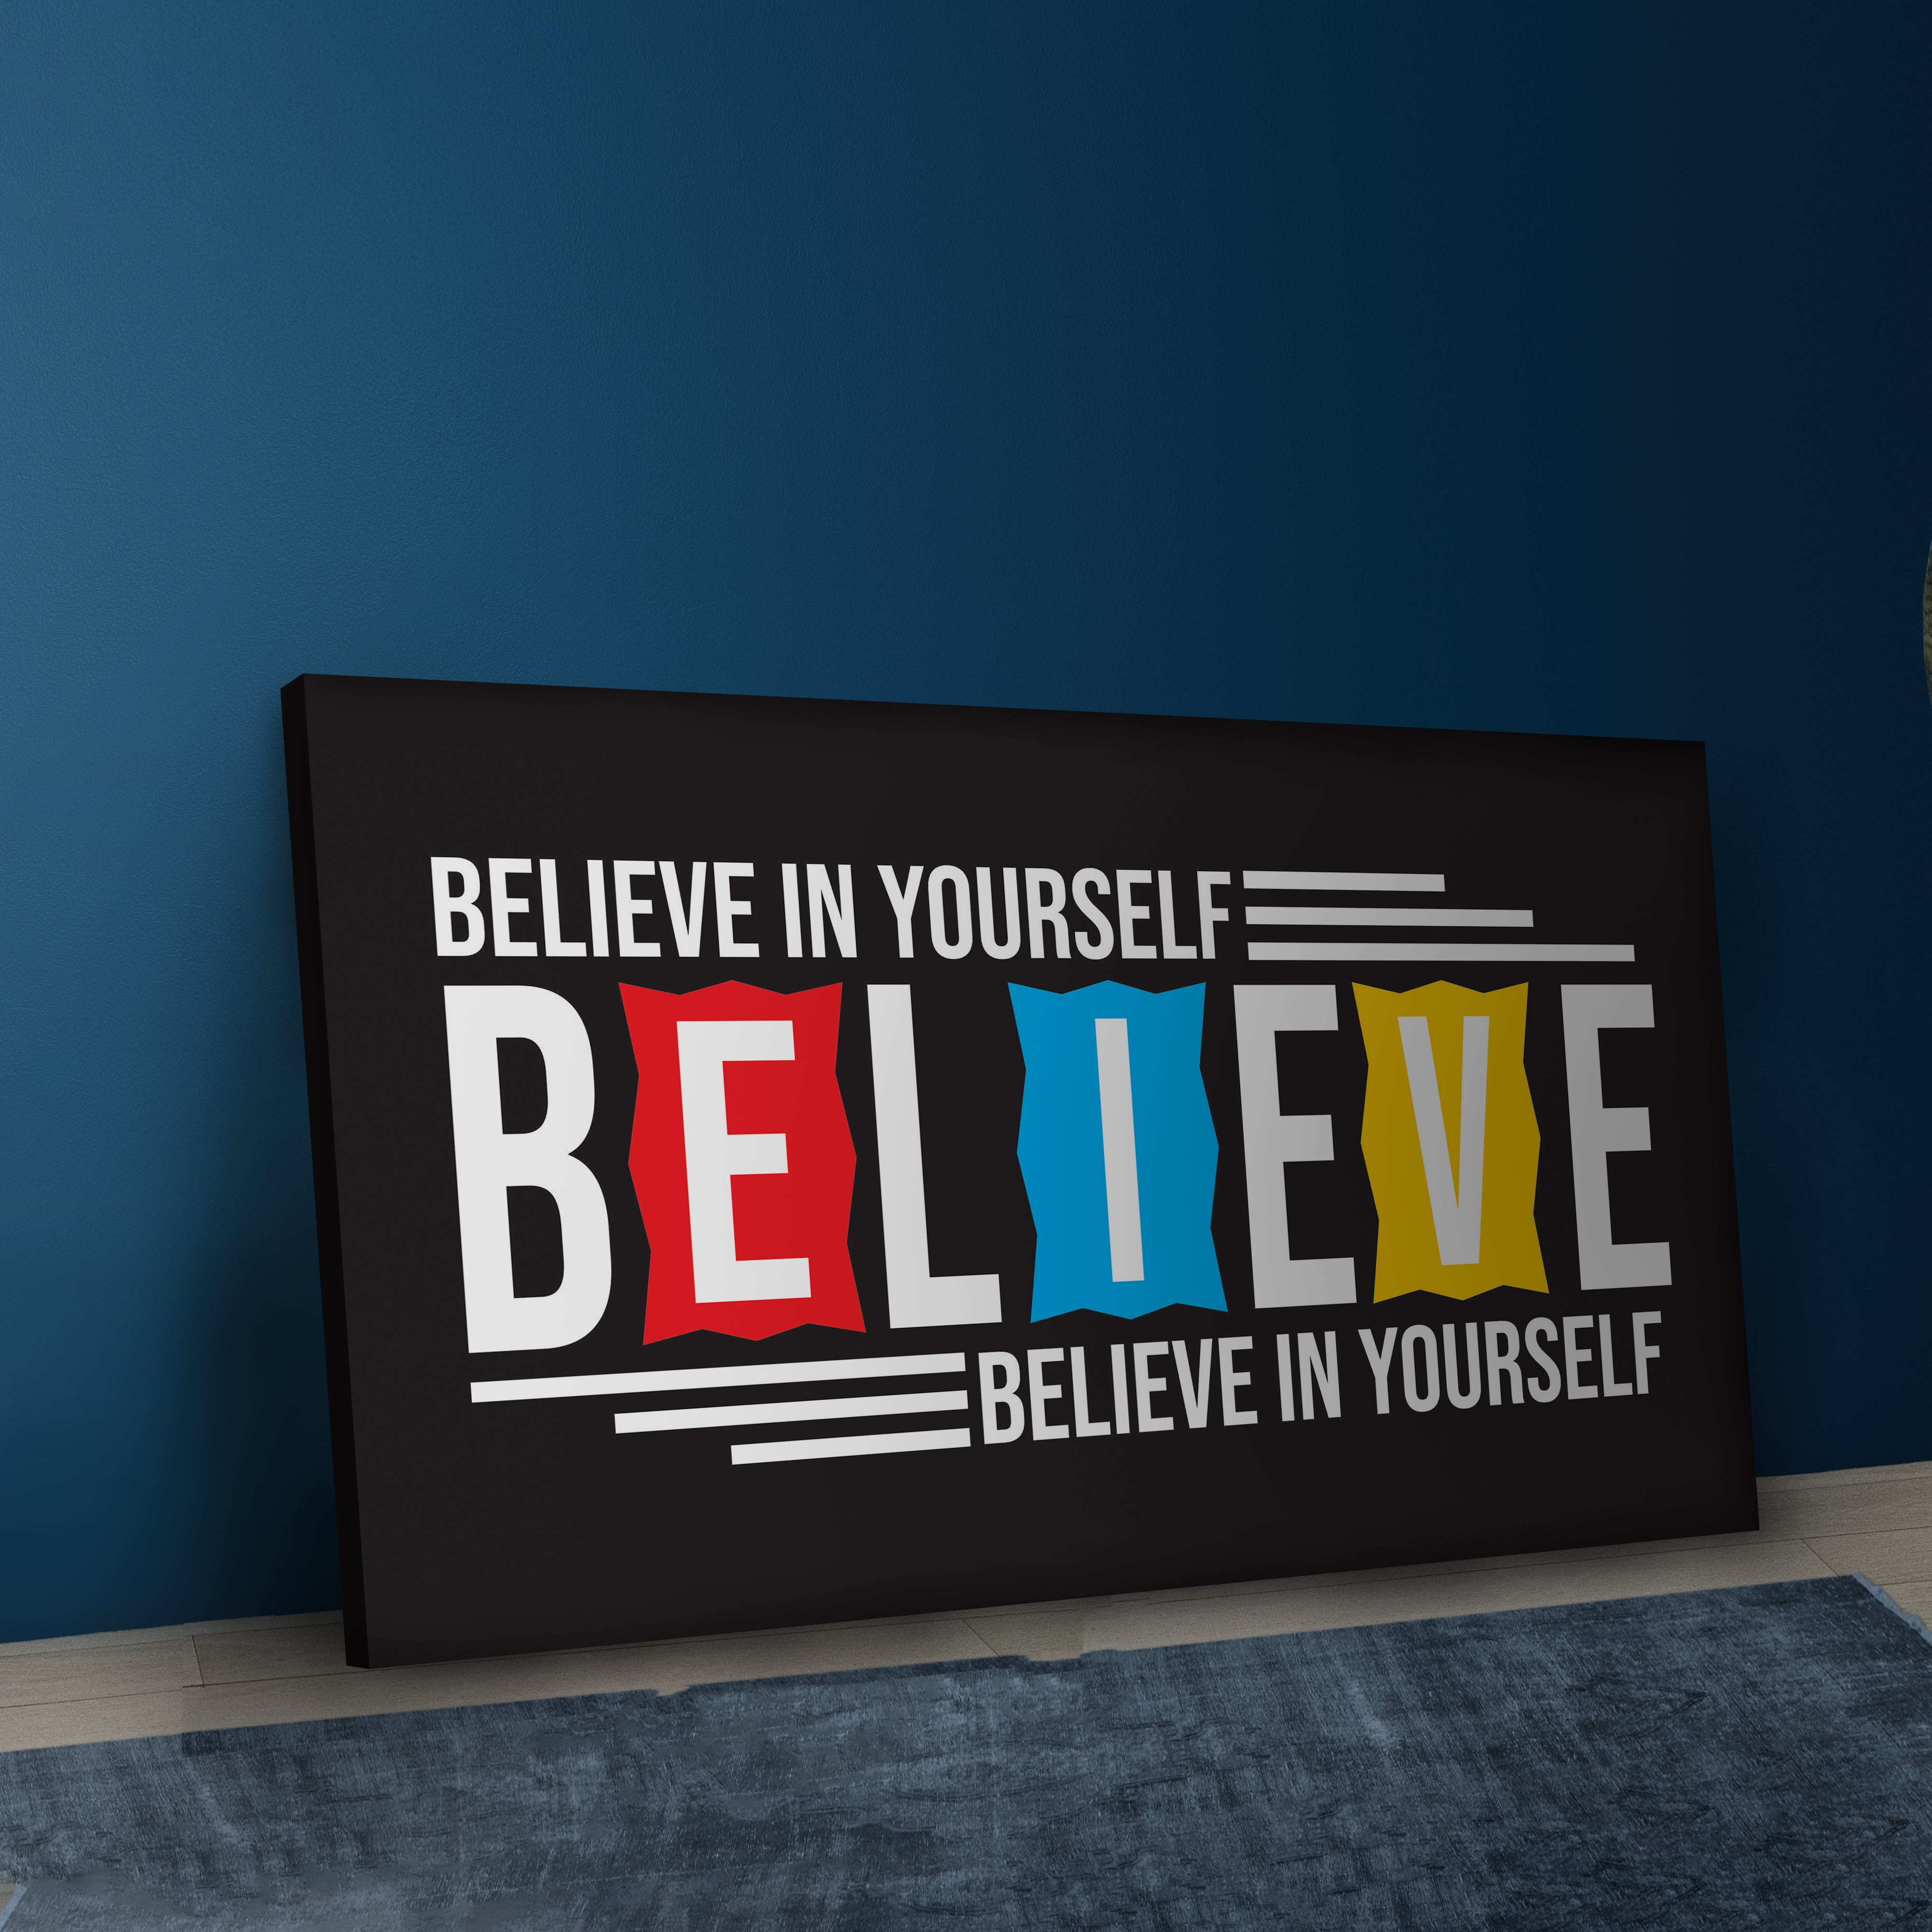 Believe in Yourself - Motivational Quotes.